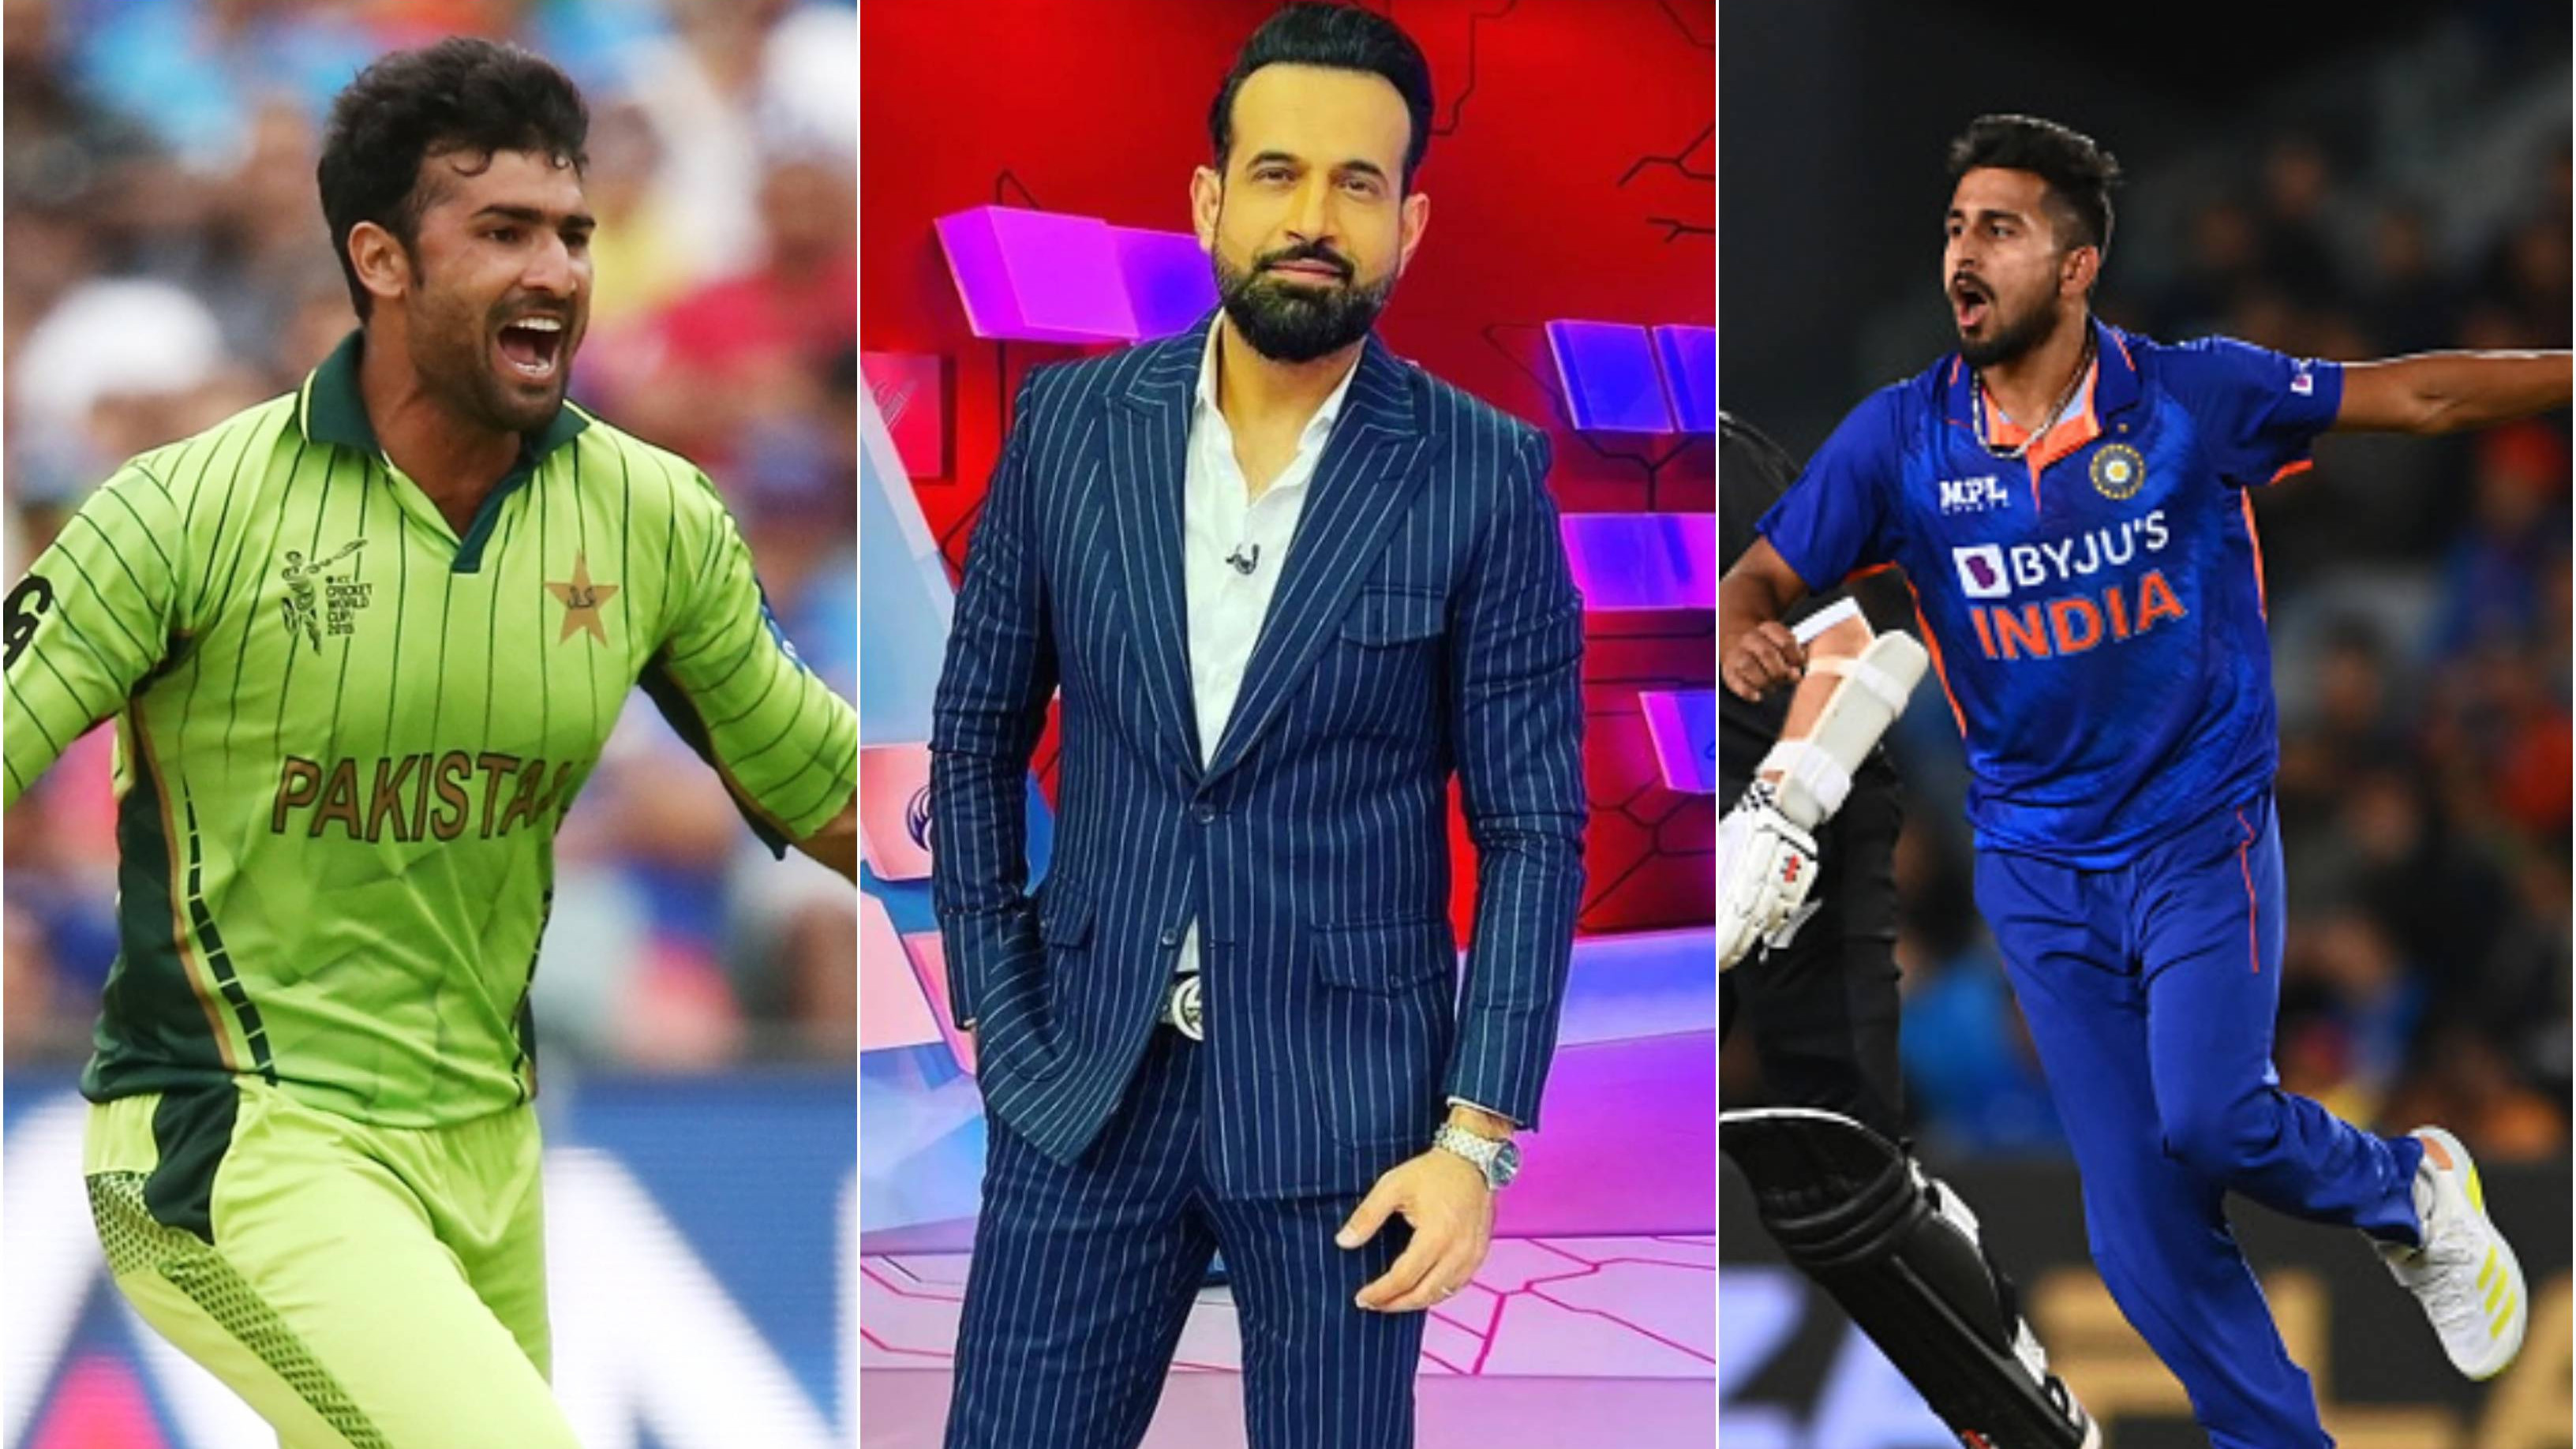 “Inhe attention chaiye,” Irfan Pathan’s befitting reply to Sohail Khan’s comment on Umran Malik